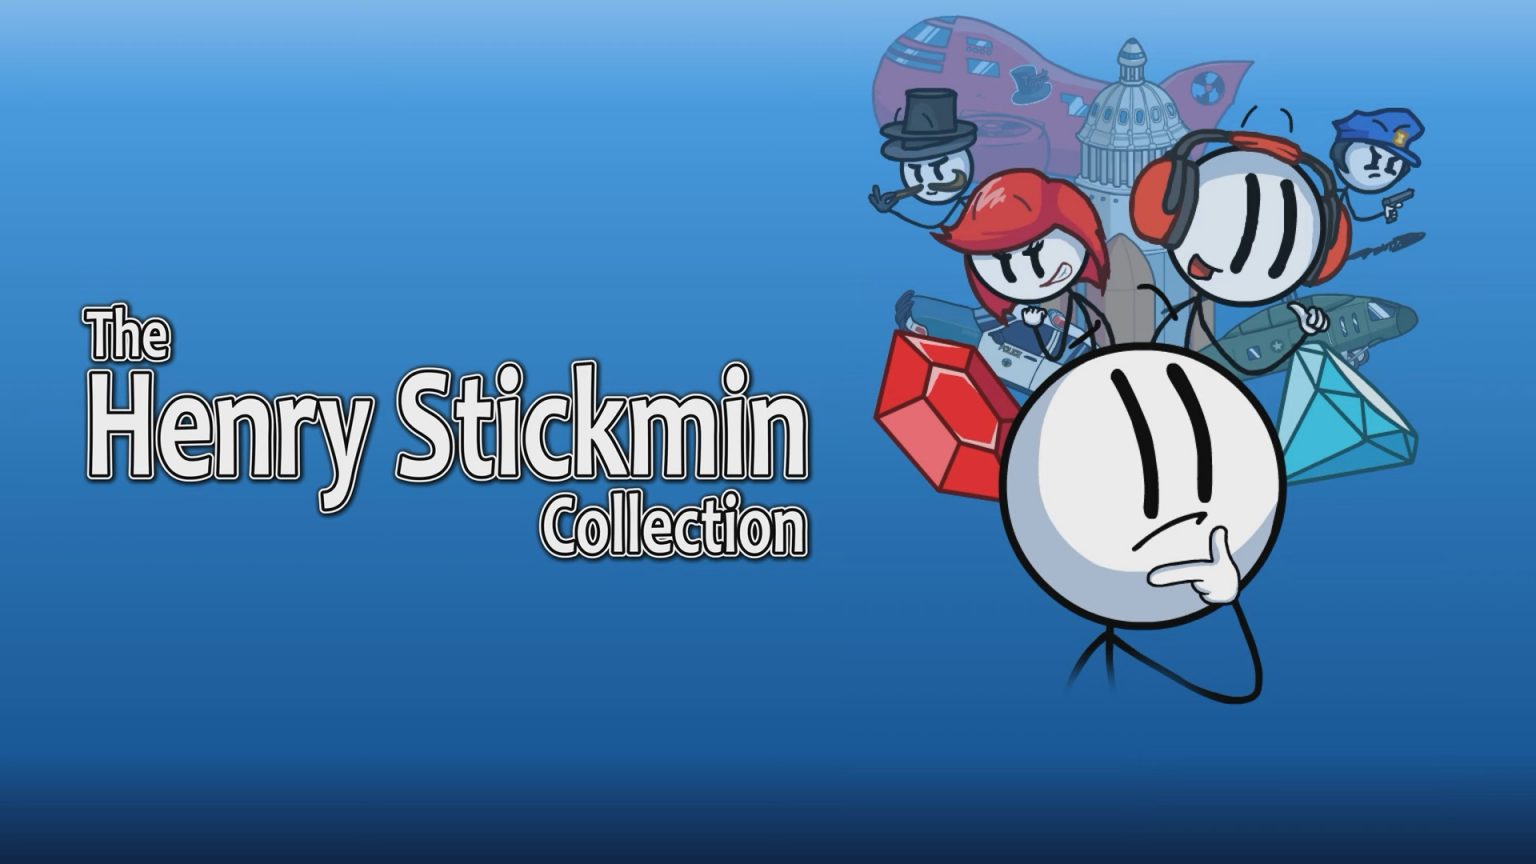 thsc the henry stickmin collection